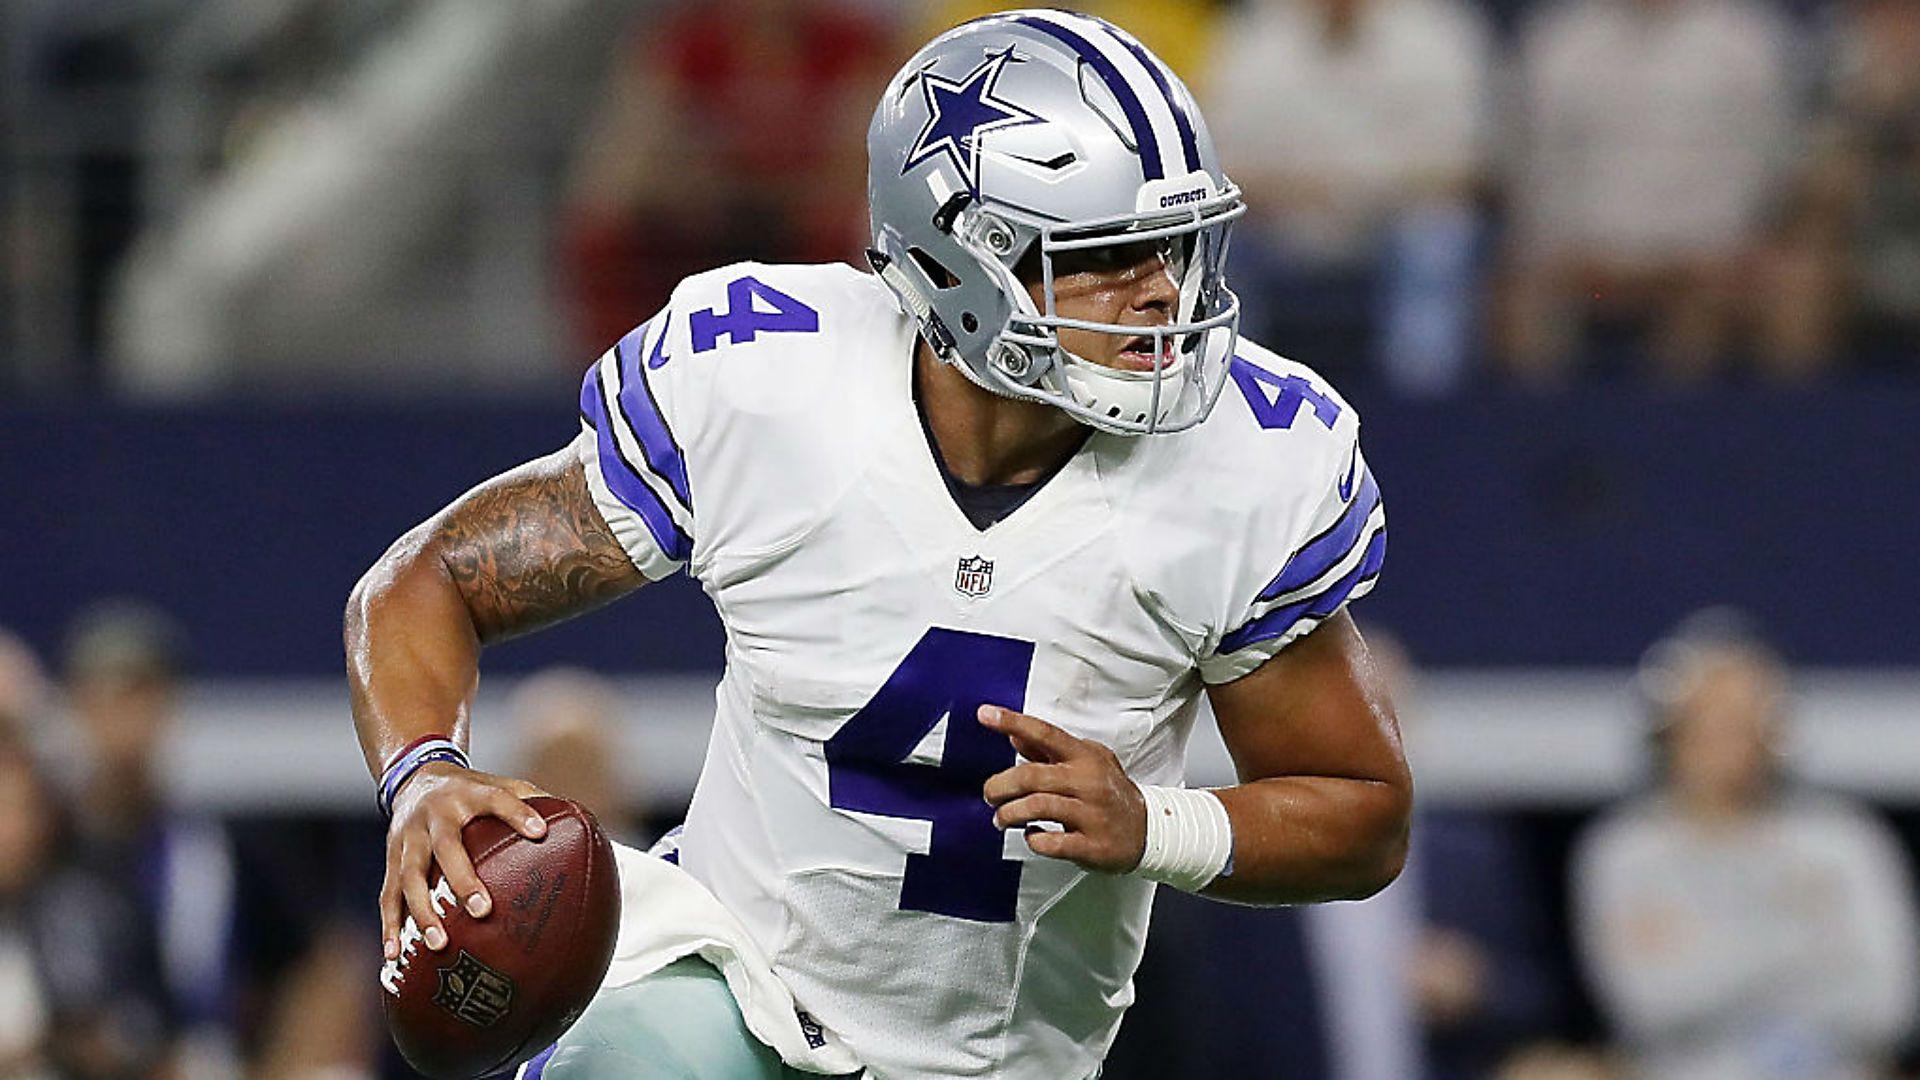 Dak Prescott rebounds in time to rally Cowboys past Eagles in OT.